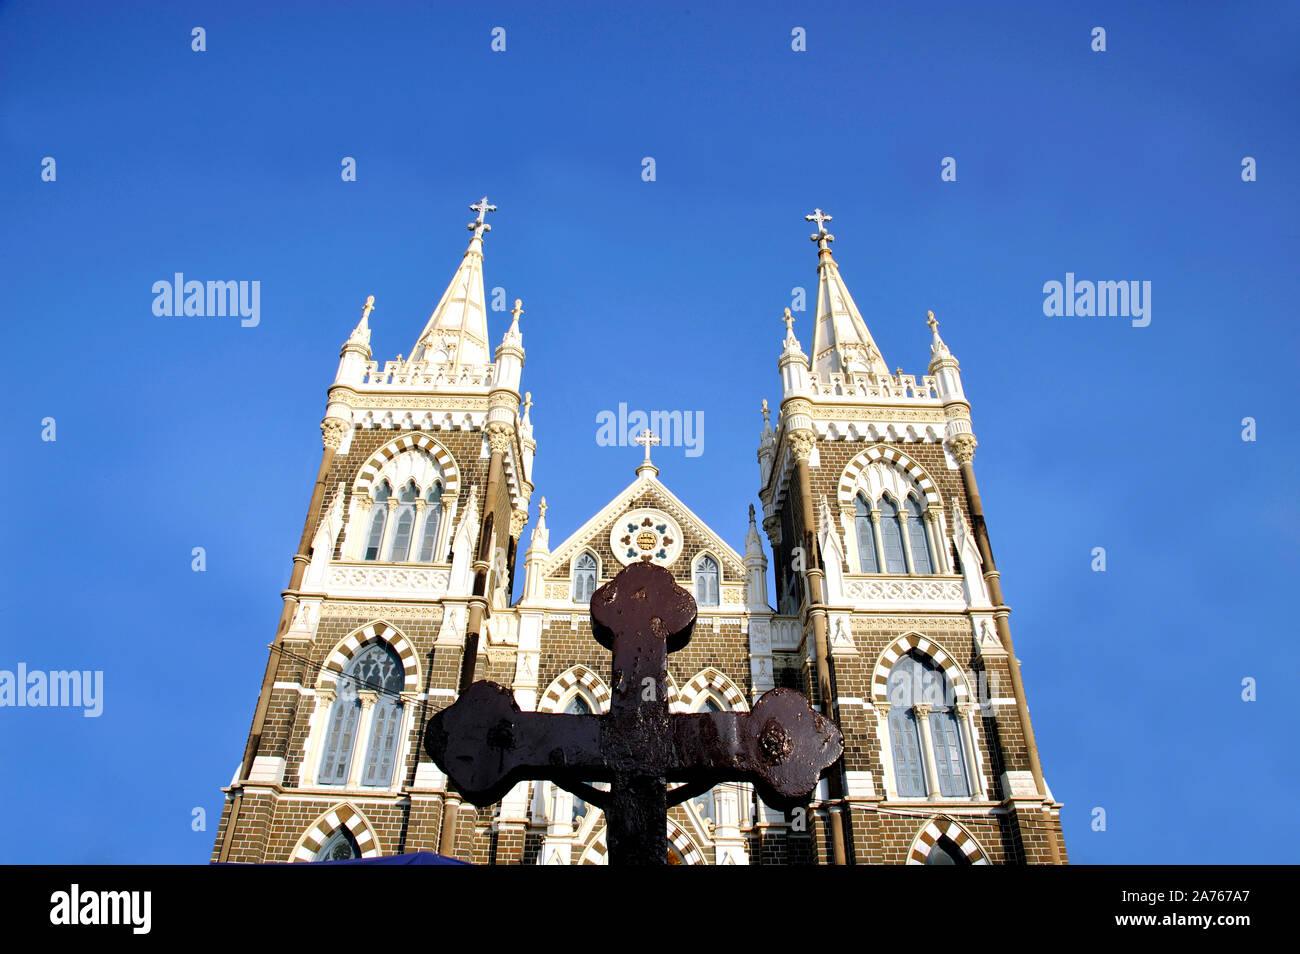 Place of worship The Basilica of Our Lady of the Mount more commonly known as Mount Mary Church is a Roman Catholic Basilica located in Bandra, Mumbai Stock Photo